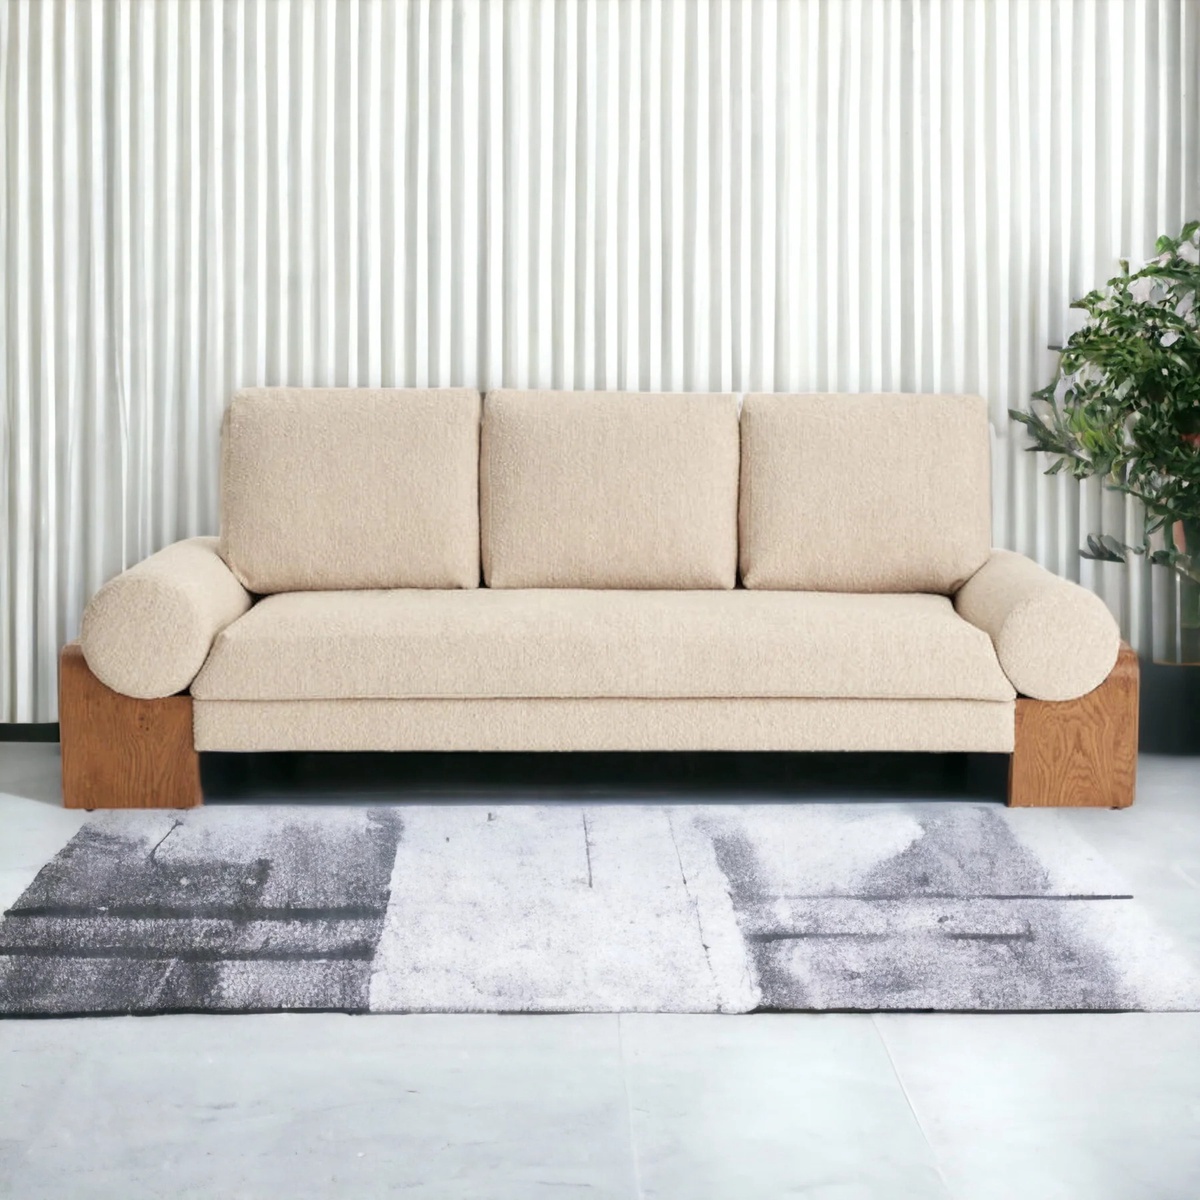 Take Your Living Room to the Next Level With Manric 3 Seater Teak Wood Boucle Sofa